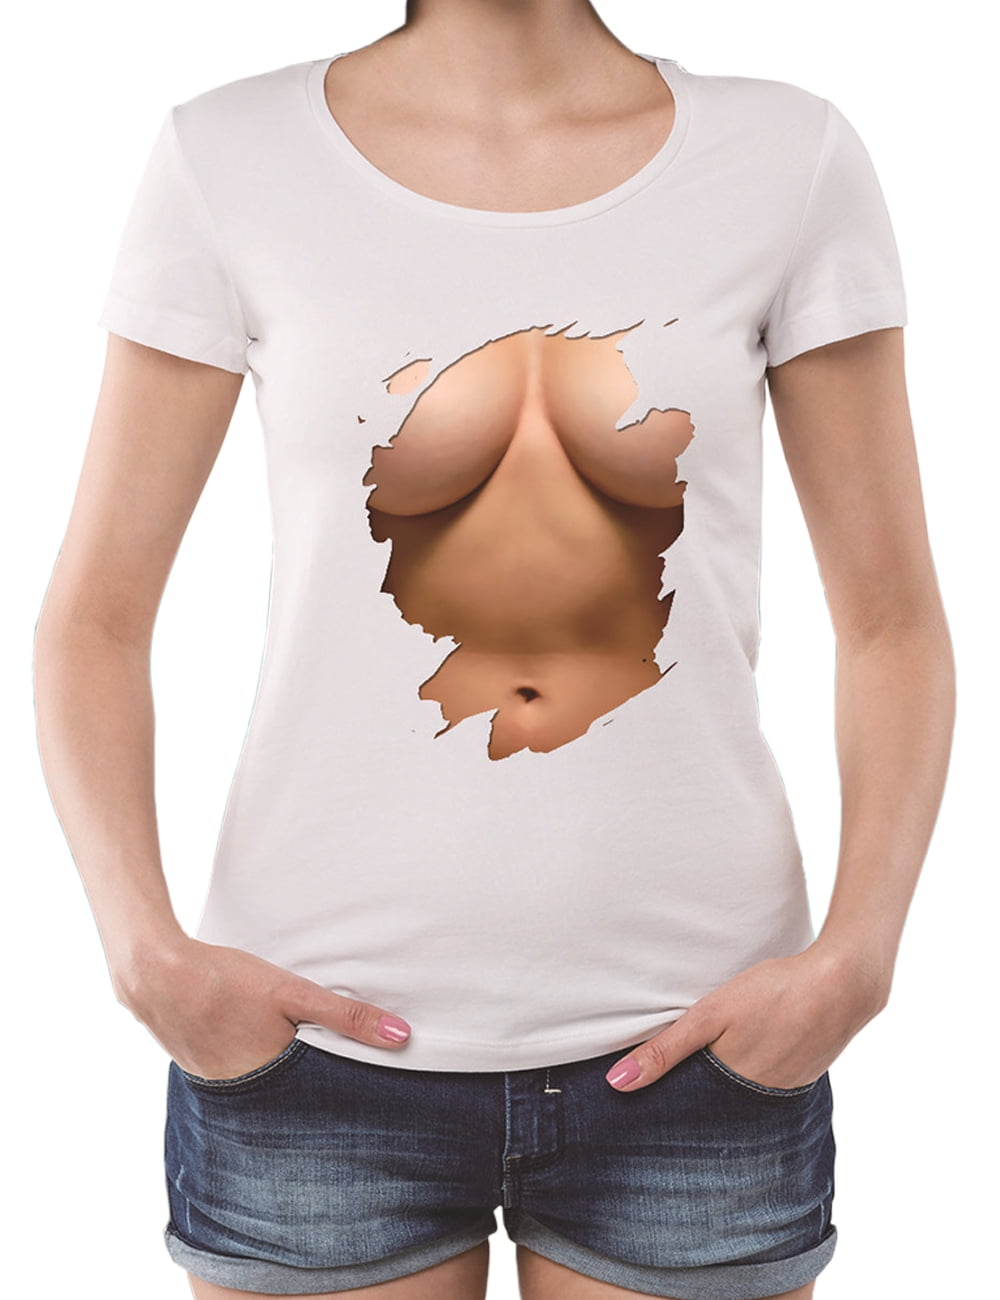 Best of Shirt with boobs on it